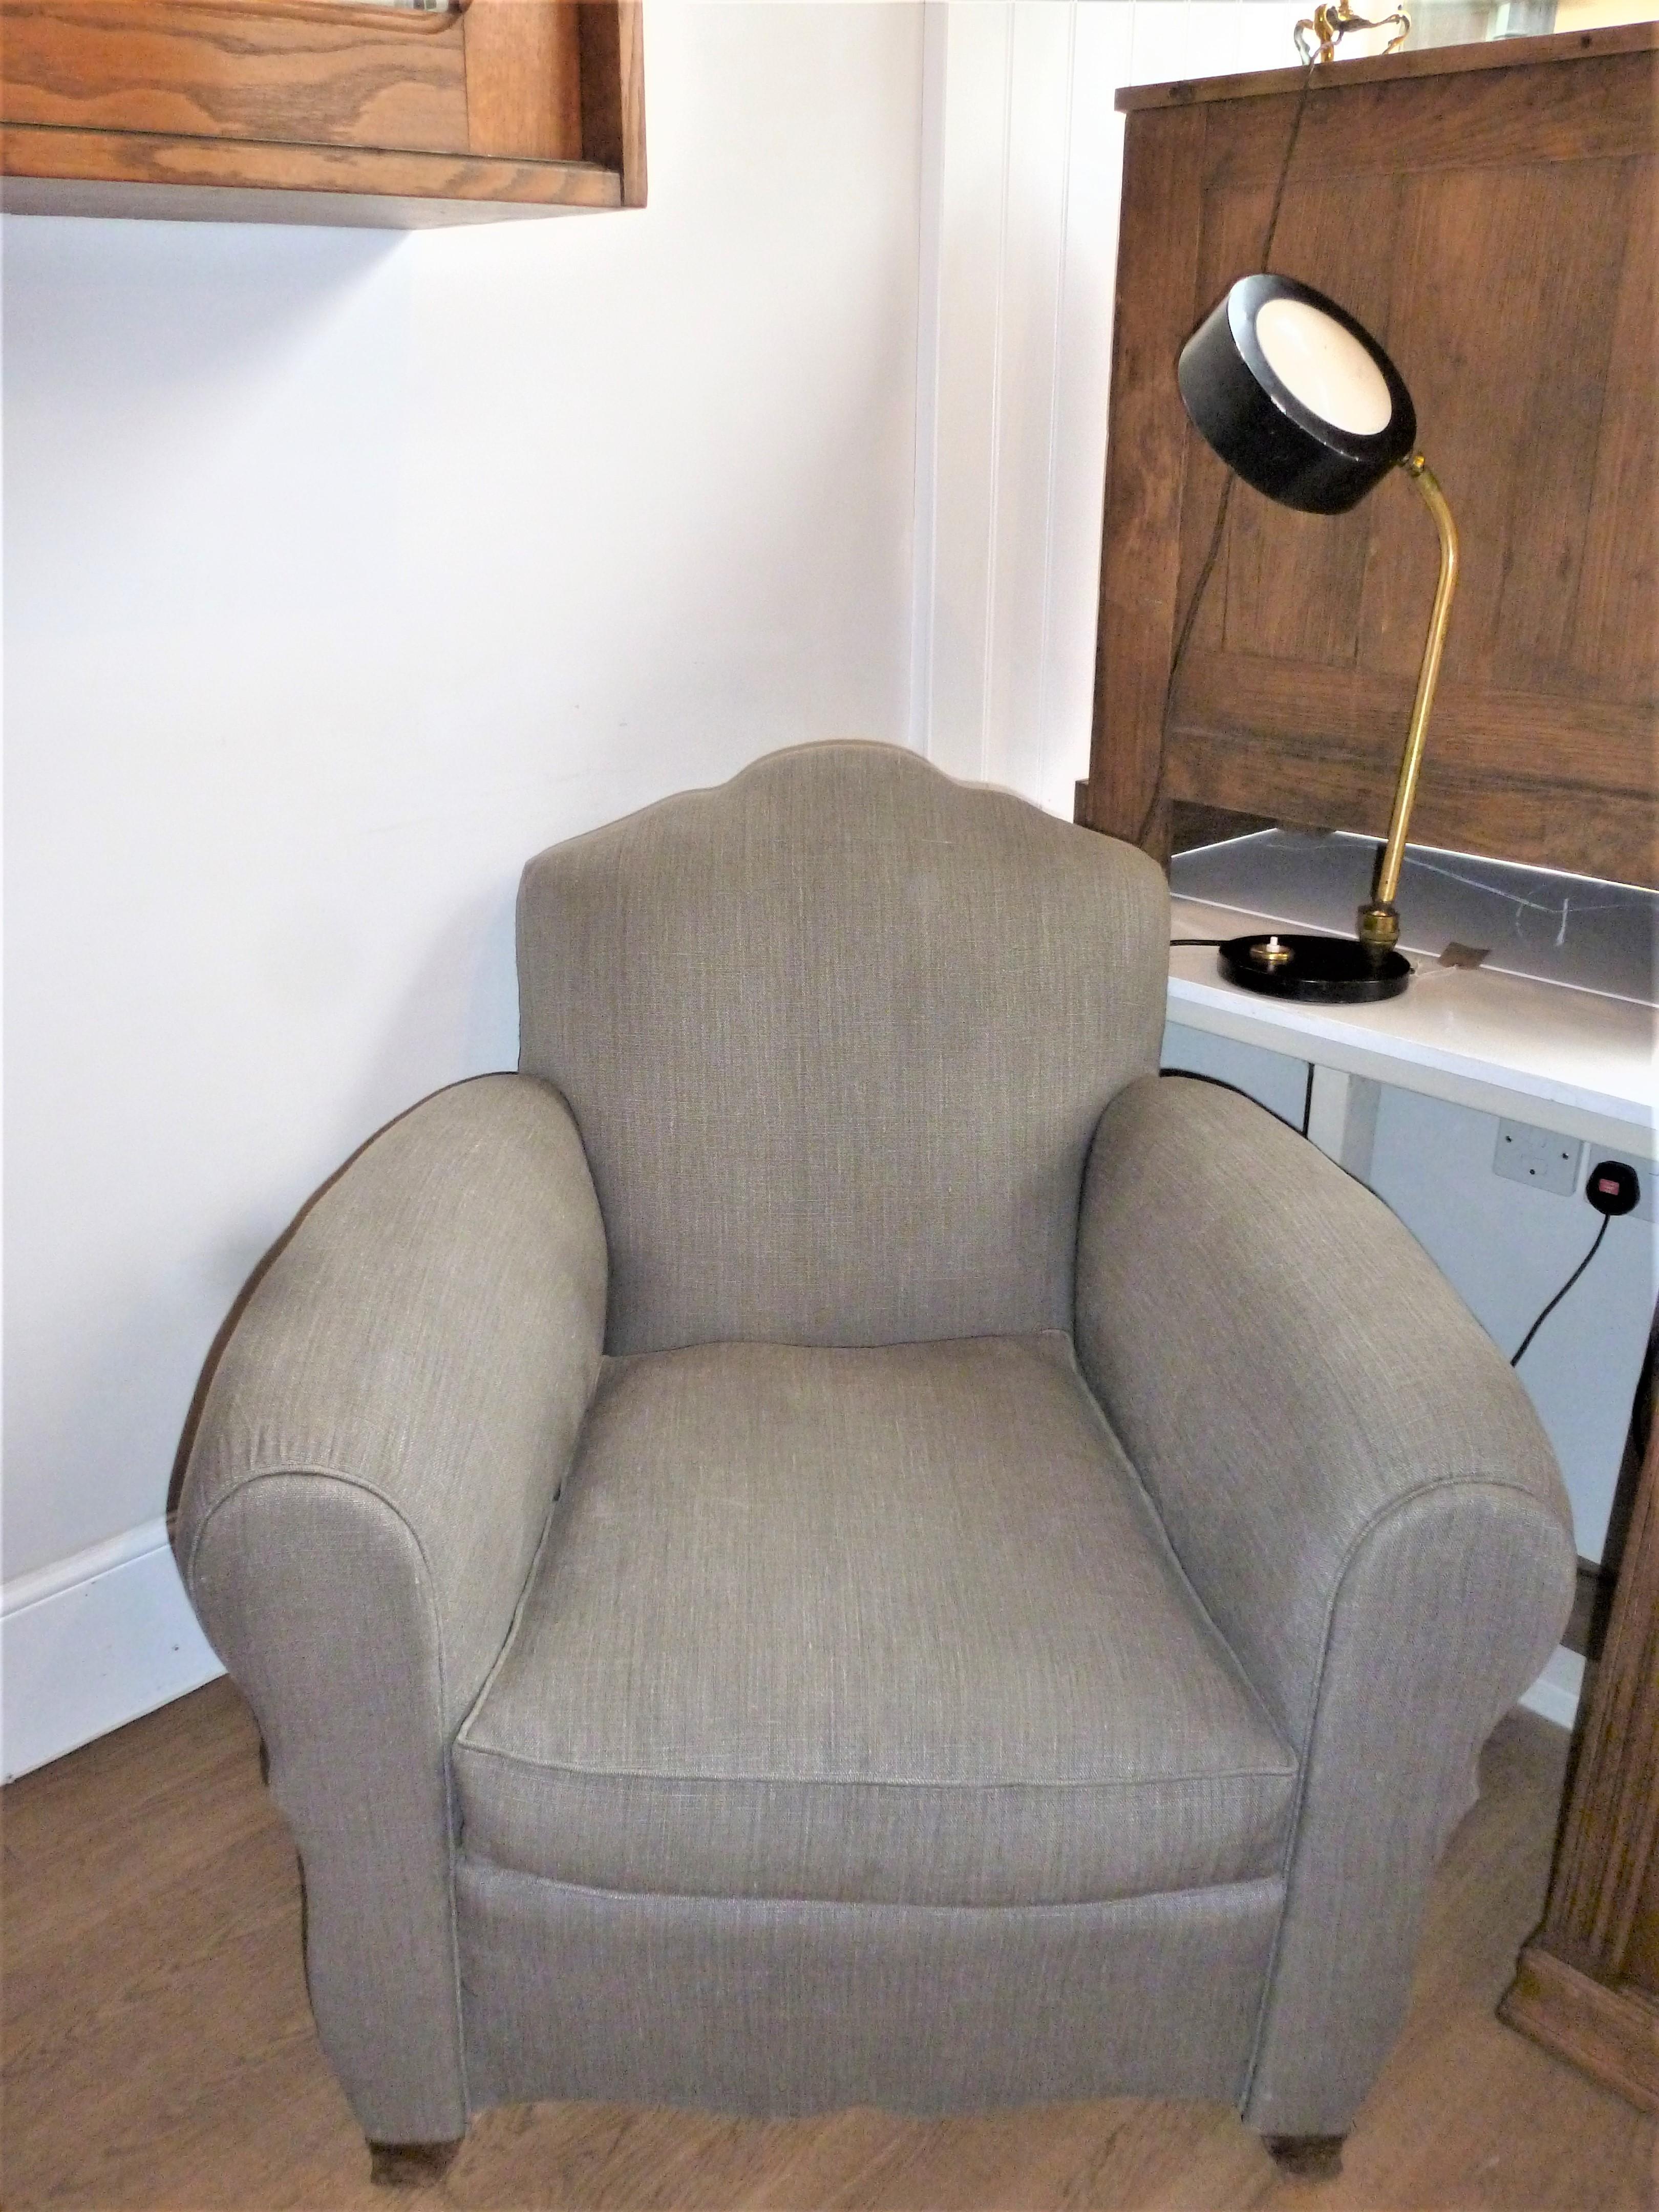 Iconic 1940 French Art Deco Club Chair Armchair Re-Upholstered Grey French Linen For Sale 1